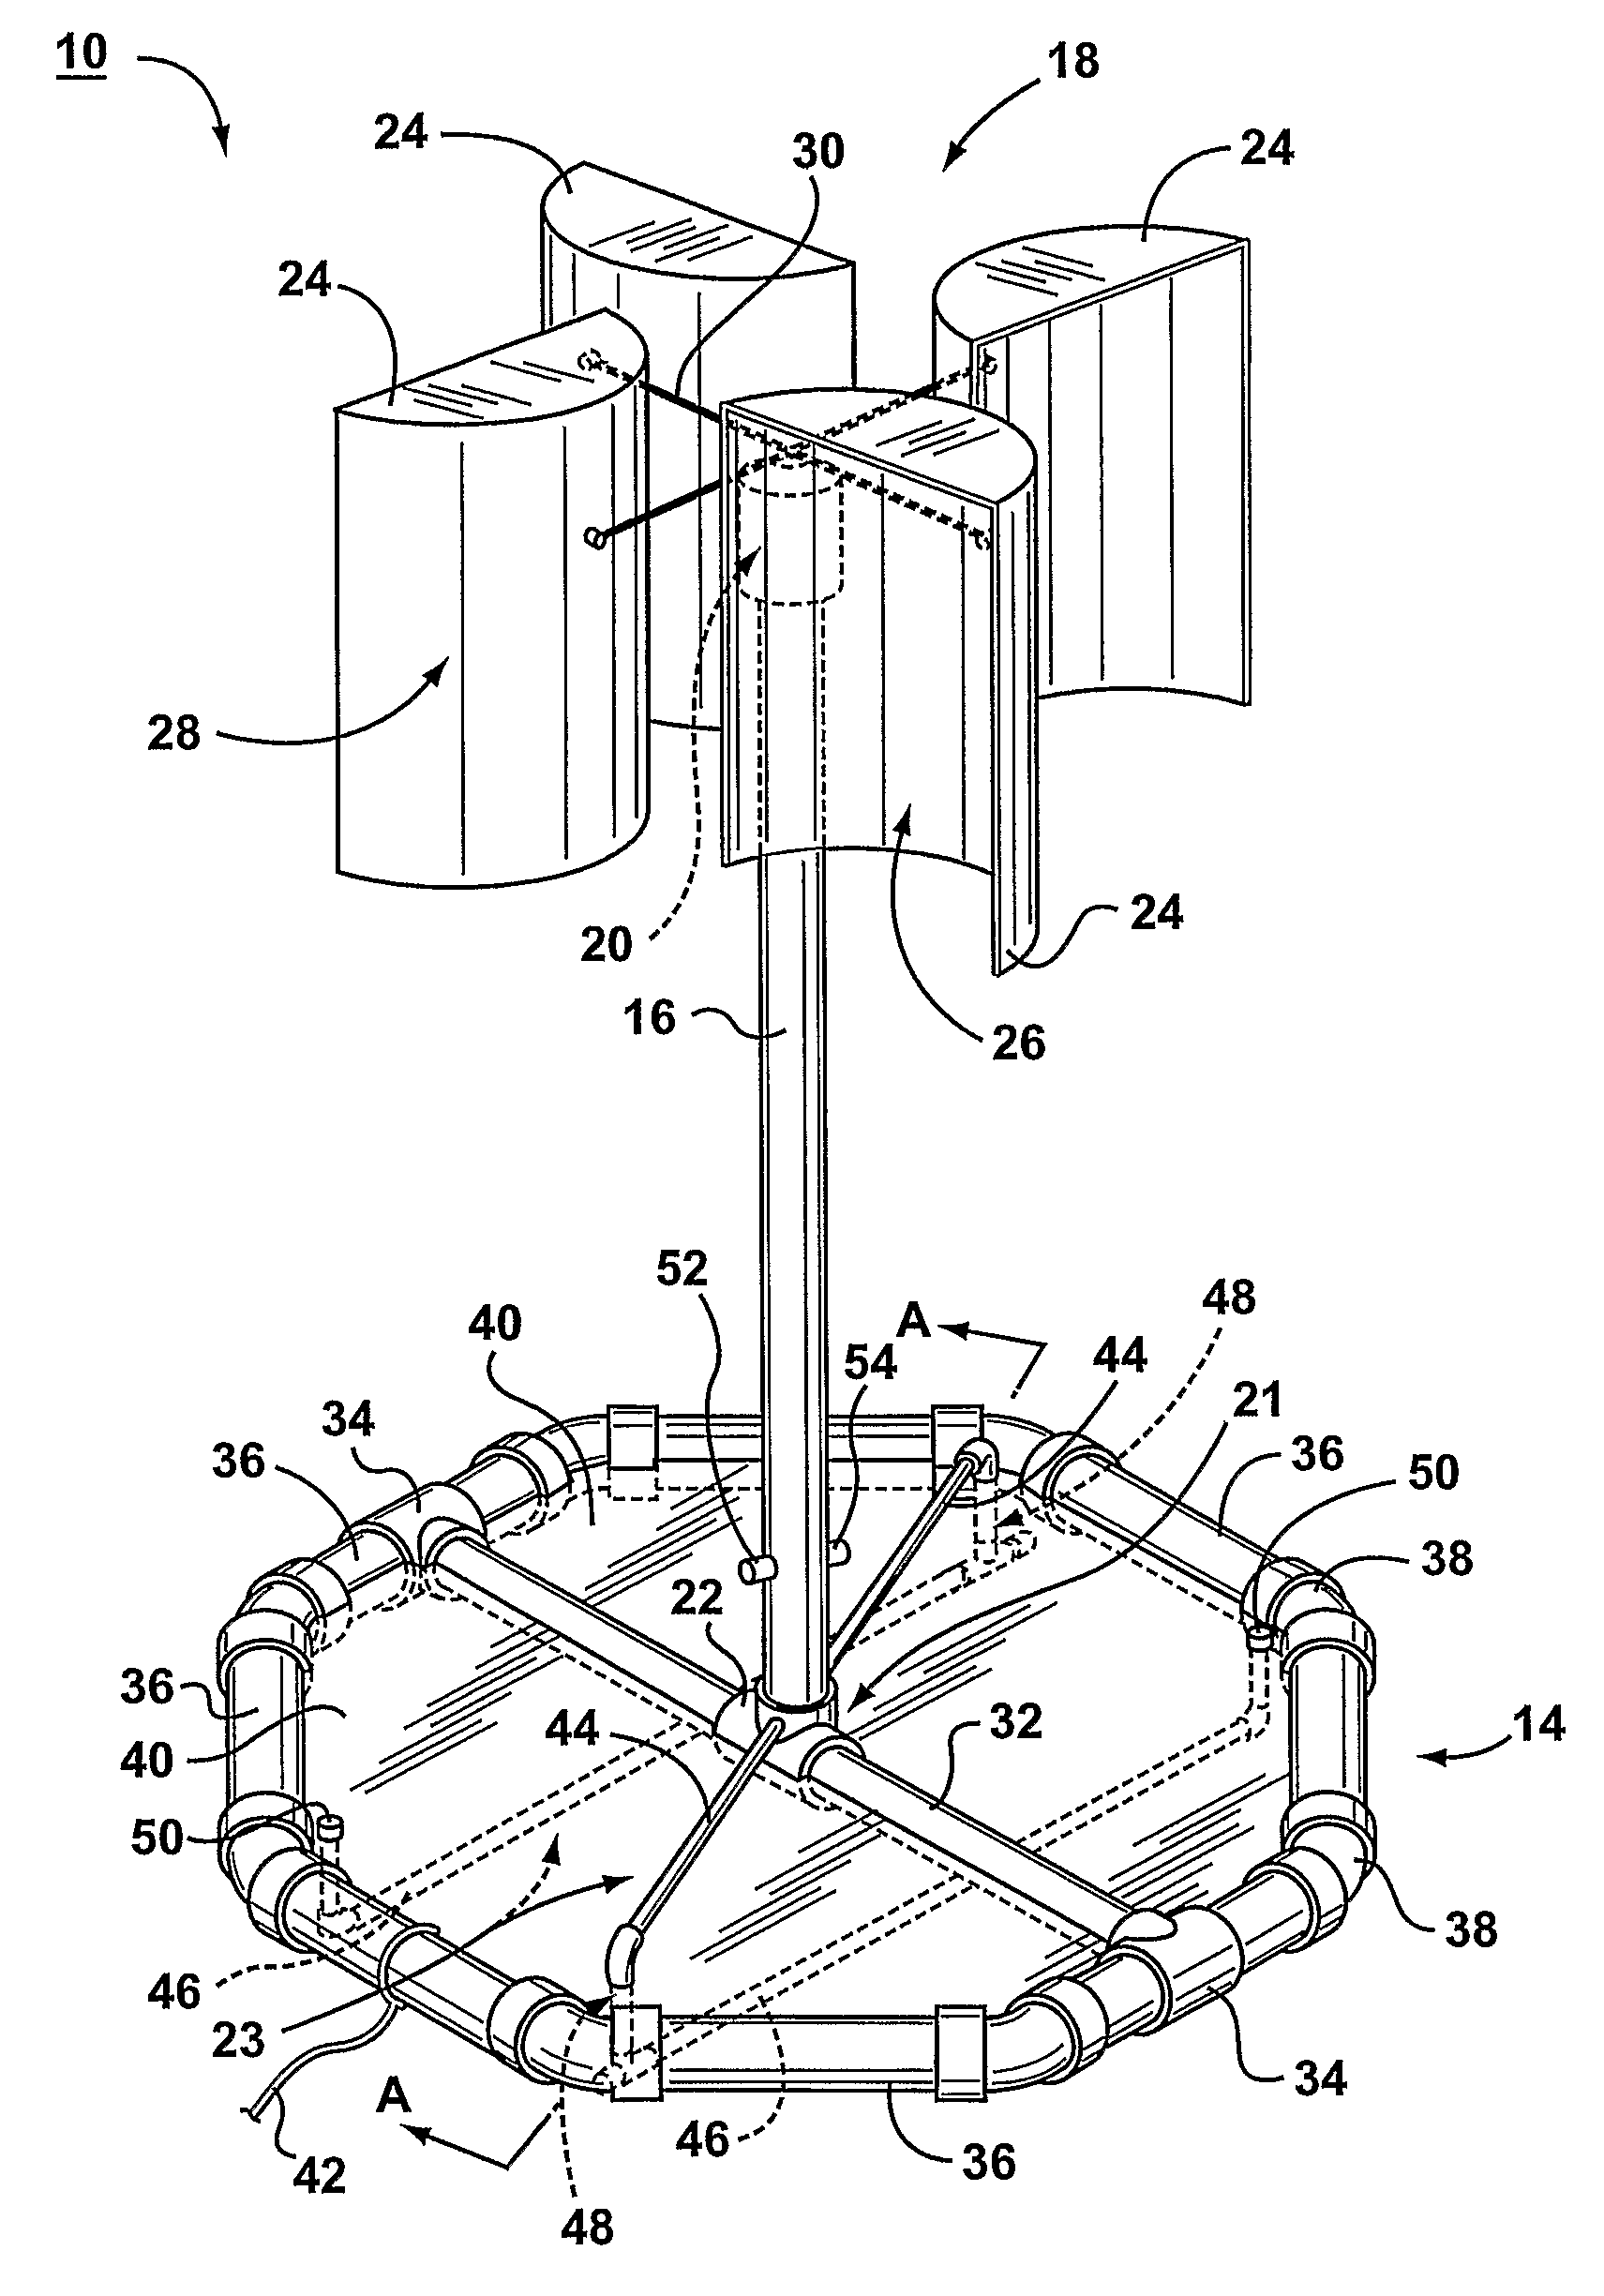 Apparatus for production of hydrogen gas using wind and wave action